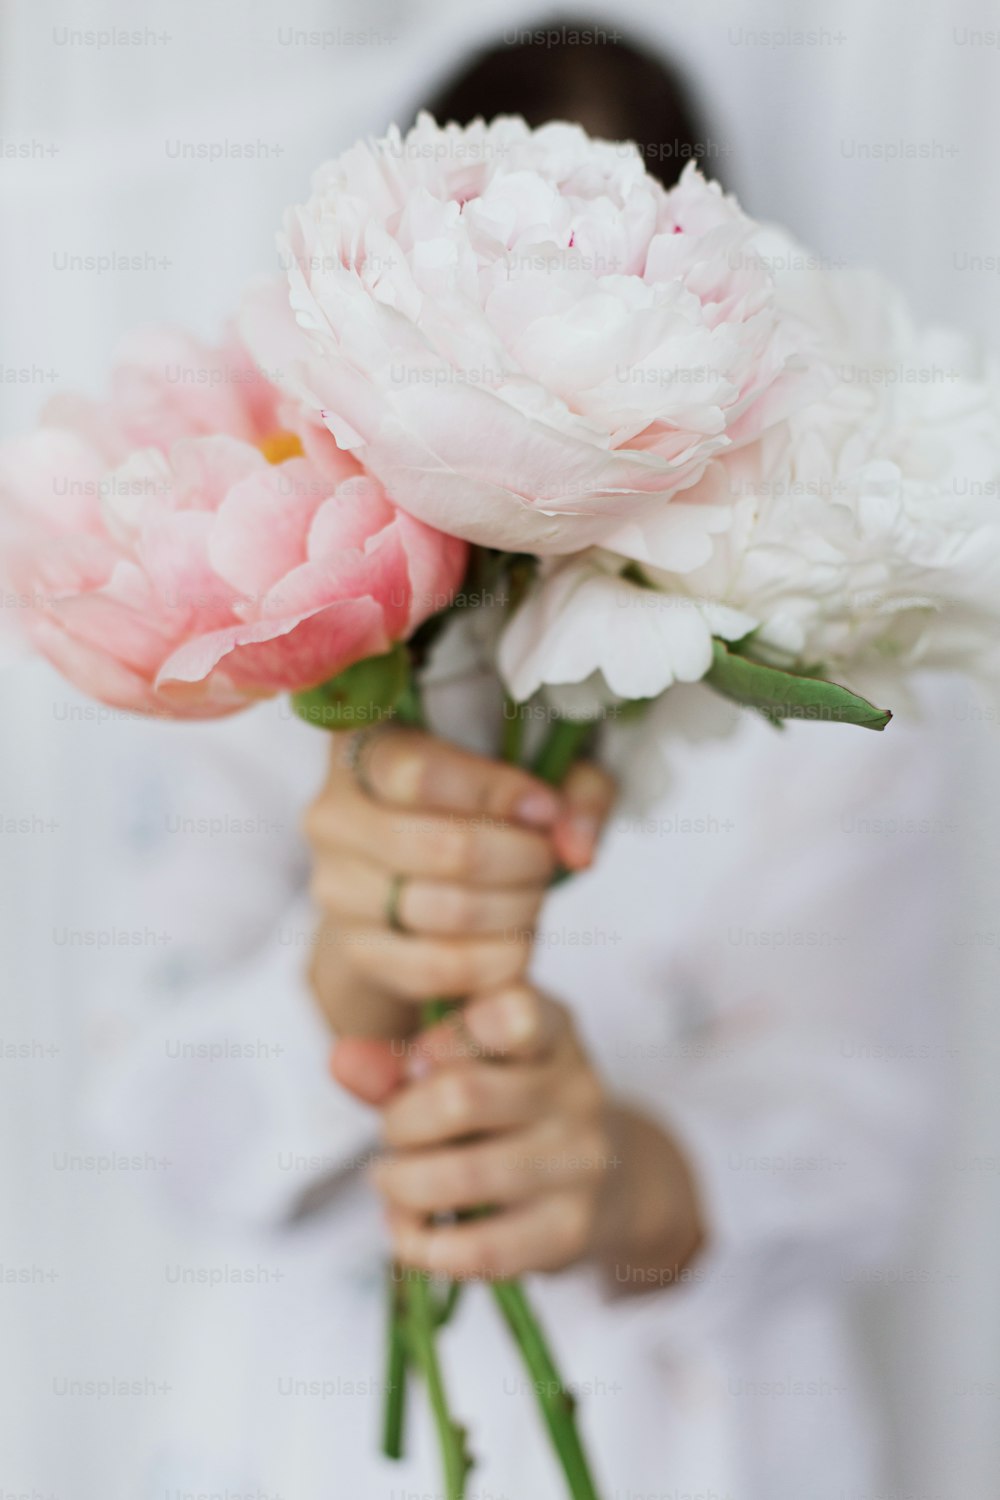 Sensual beautiful woman with peony bouquet in hands. Young stylish female gently holding big pink and white peonies flowers. Tender soft image. Spring aesthetics. Bridal morning